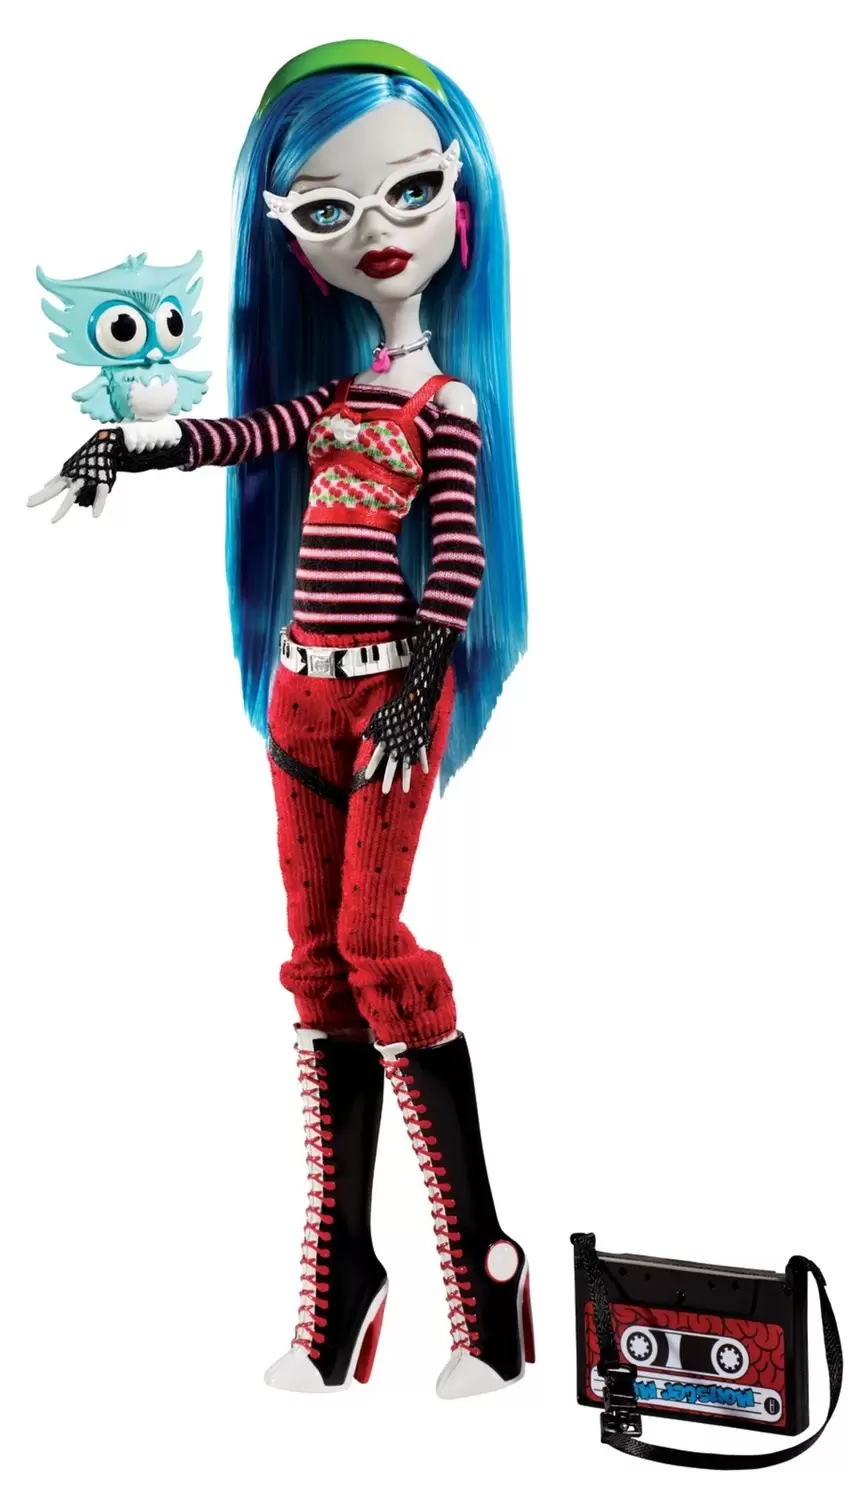 Monster High - Ghoulia Yelps - Fille de zombies - Basic